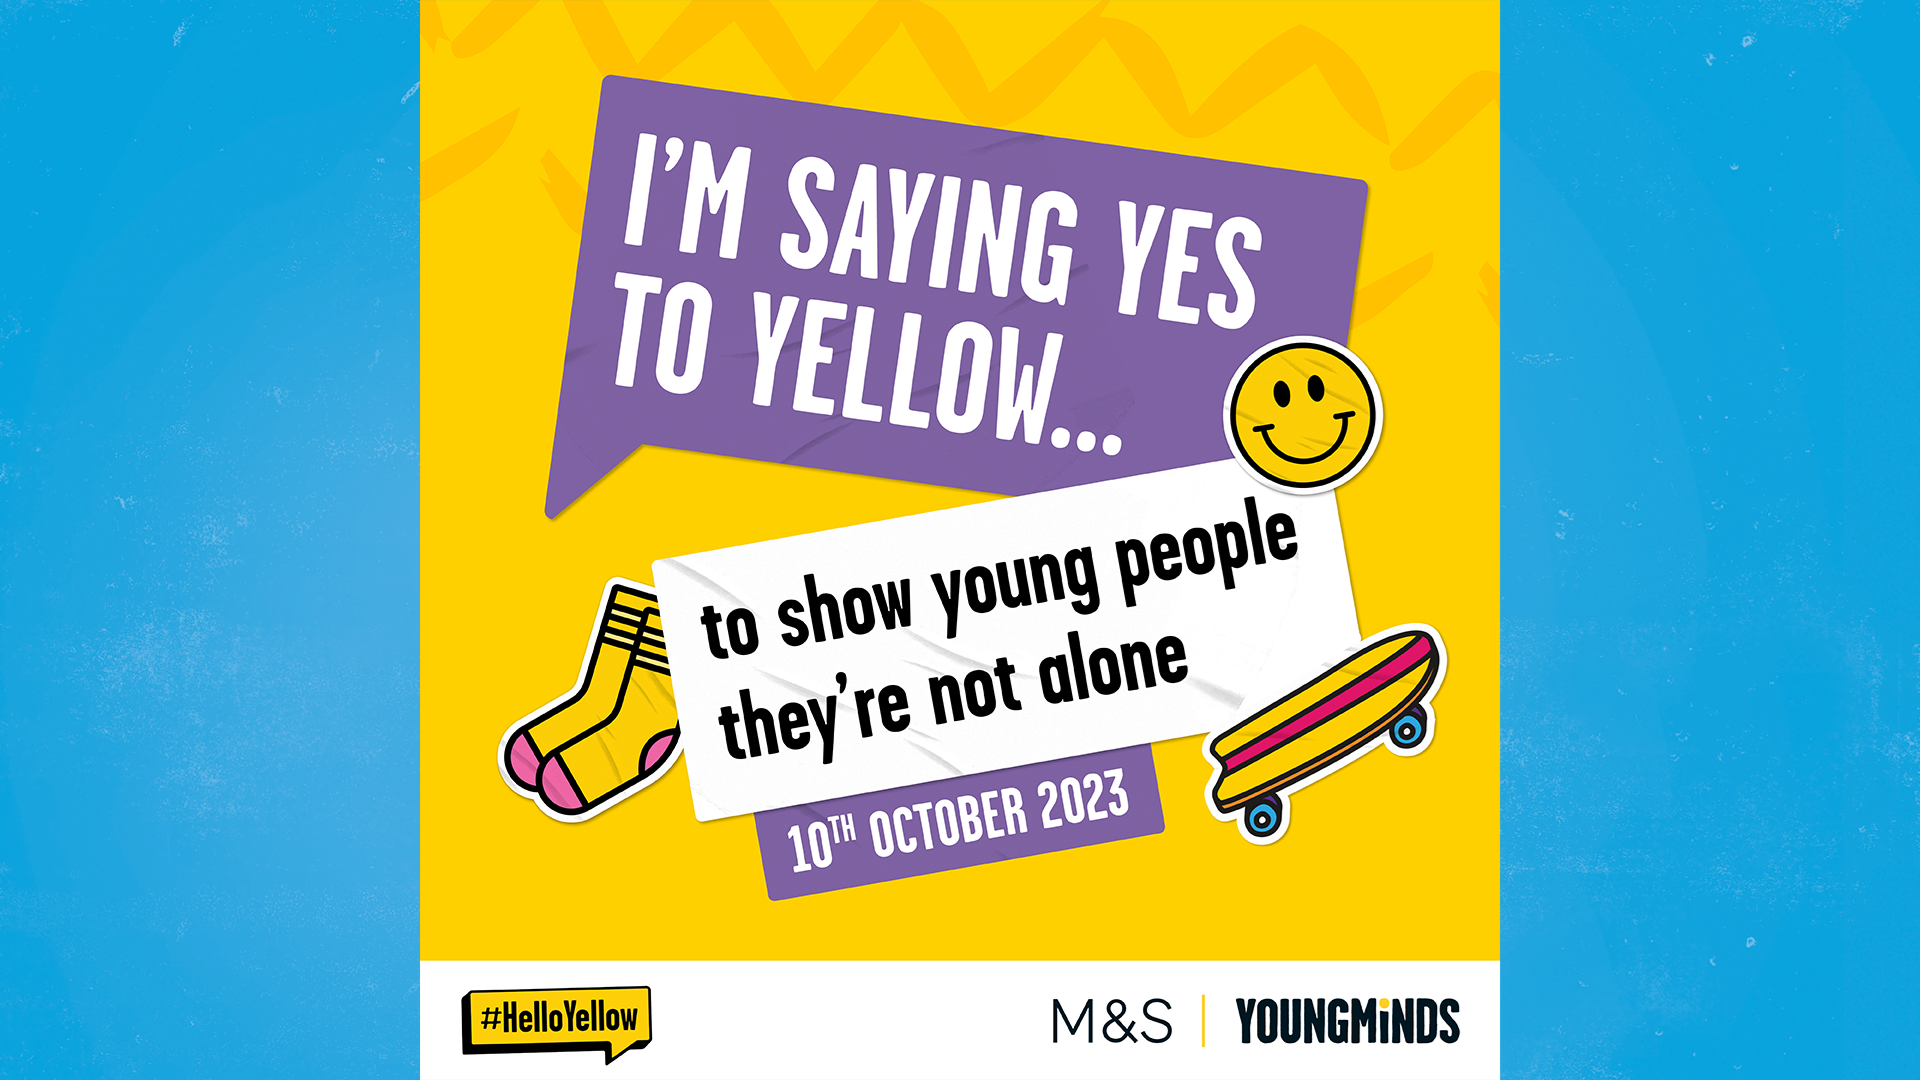 Preview of the resource: social media post. Text reads: I'm saying yes to yellow... to show young people they're not alone. 10th October 2023.